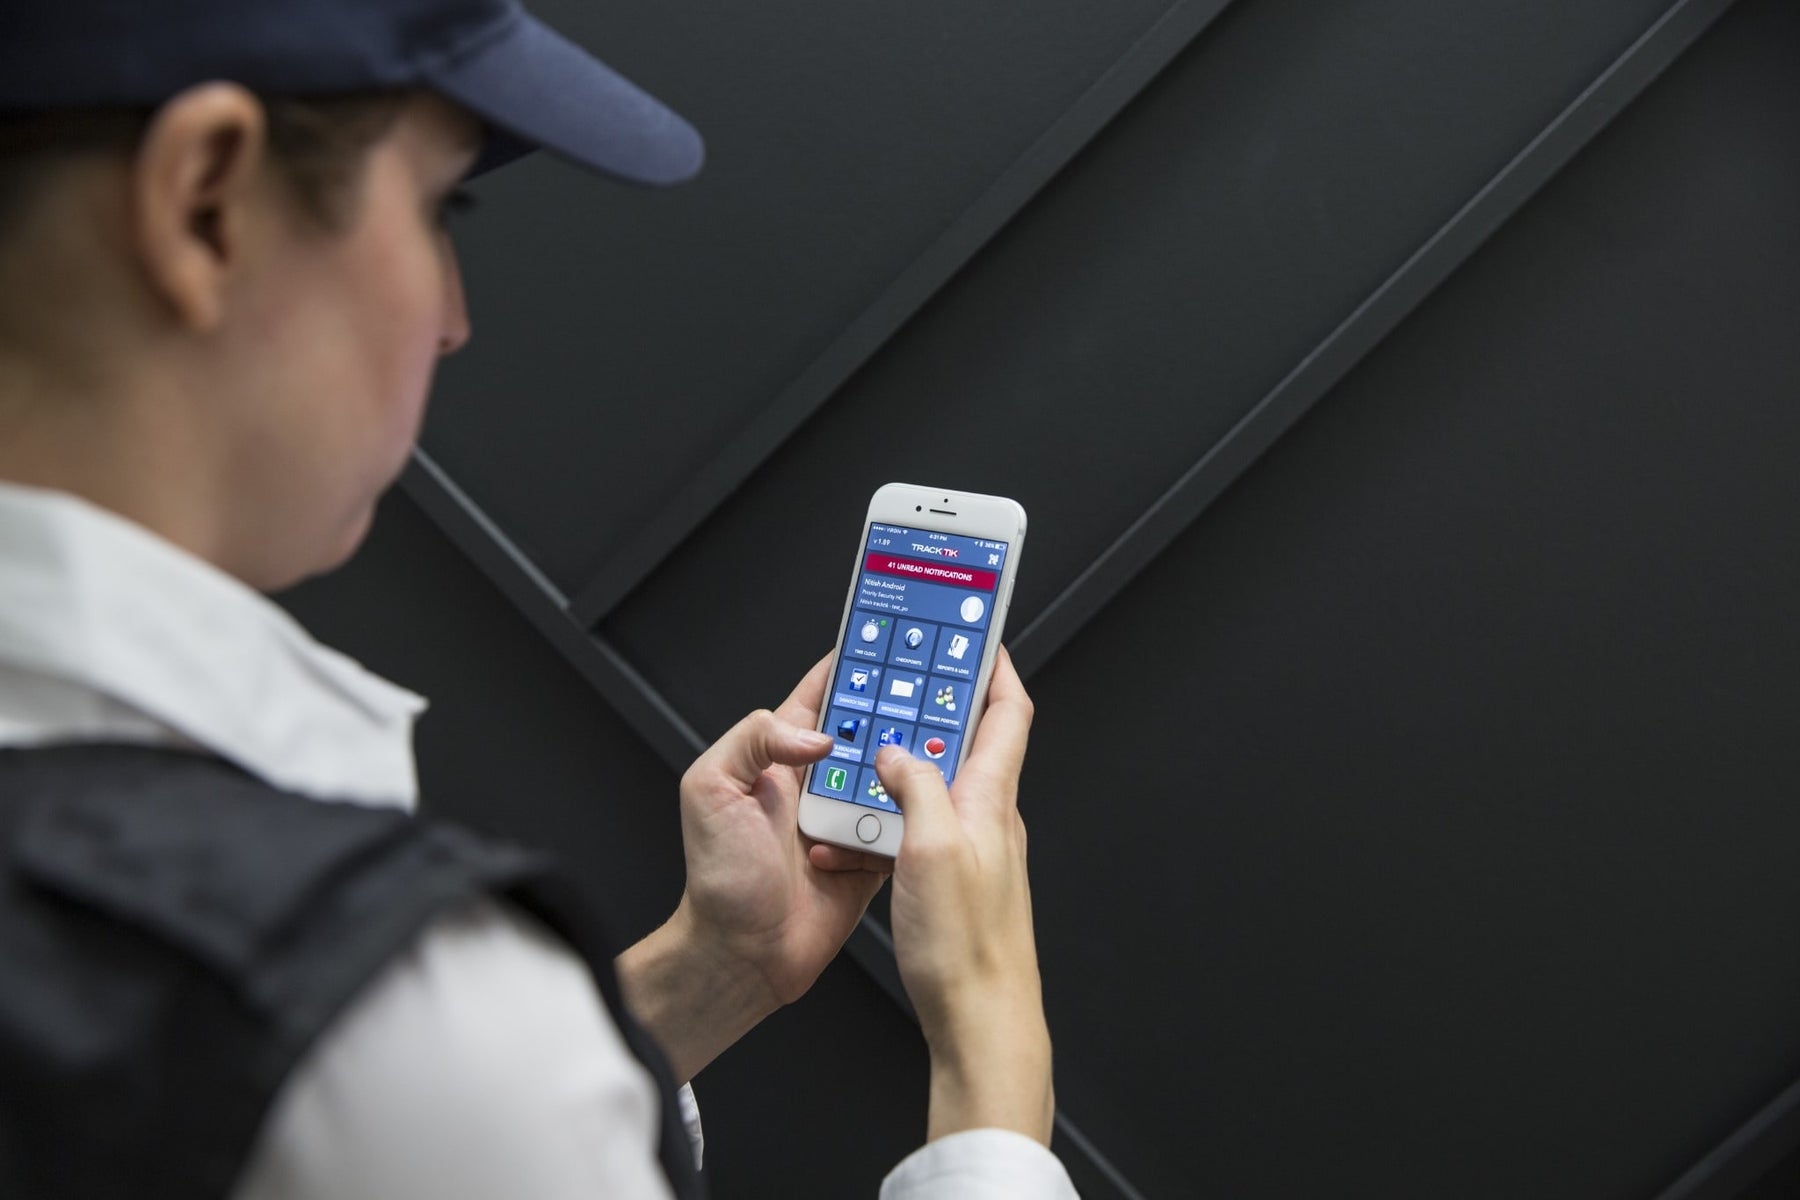 Blackbird Security provides real-time security guard updates and on site incident reports using Tracktik technology